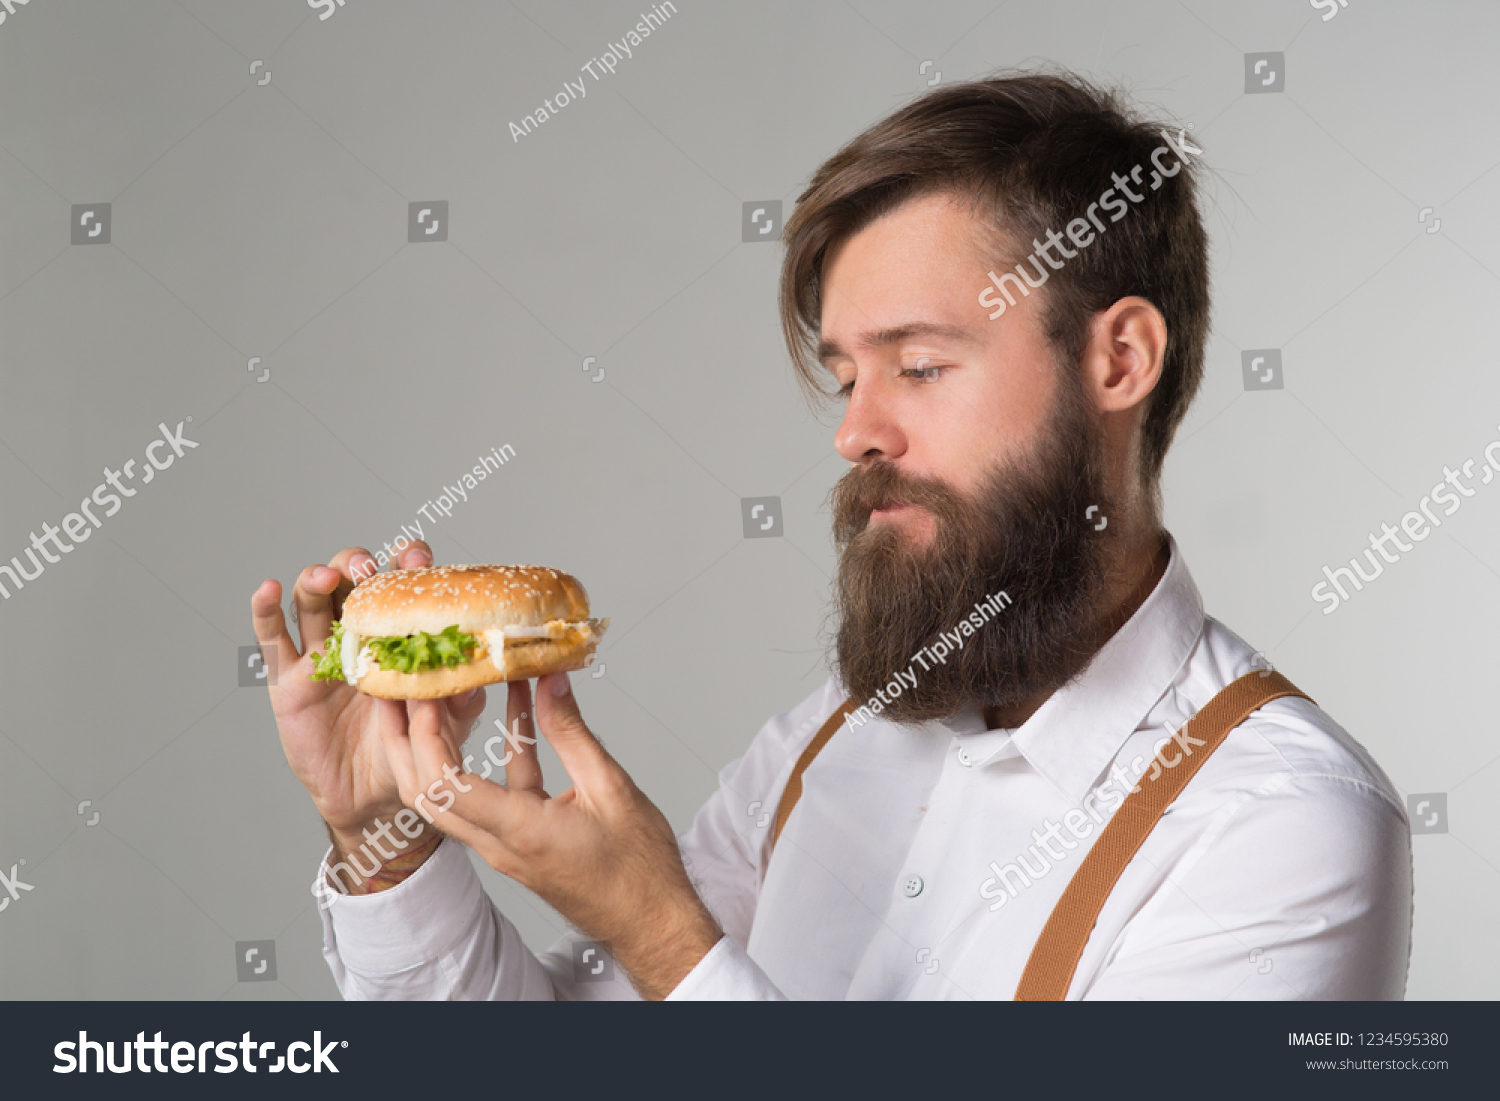 Man with beard in white shirt and suspenders eating junk food from a fast food hamburger or cheeseburger on gray background #1234595380